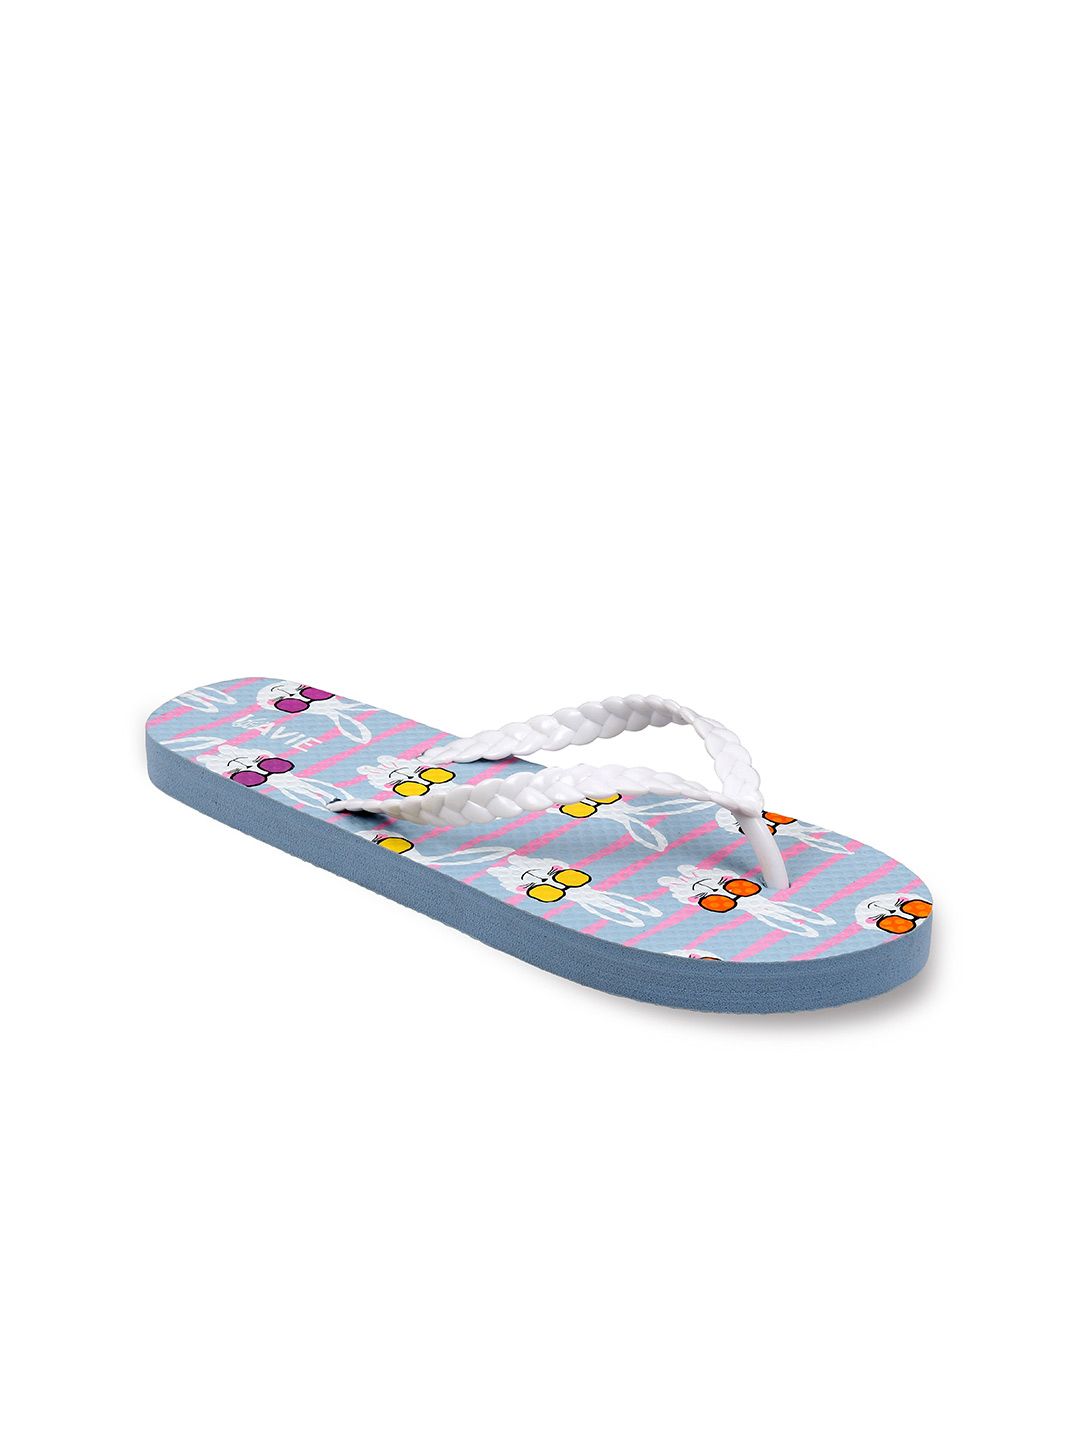 Lavie Women Blue & White Printed Room Slippers Price in India